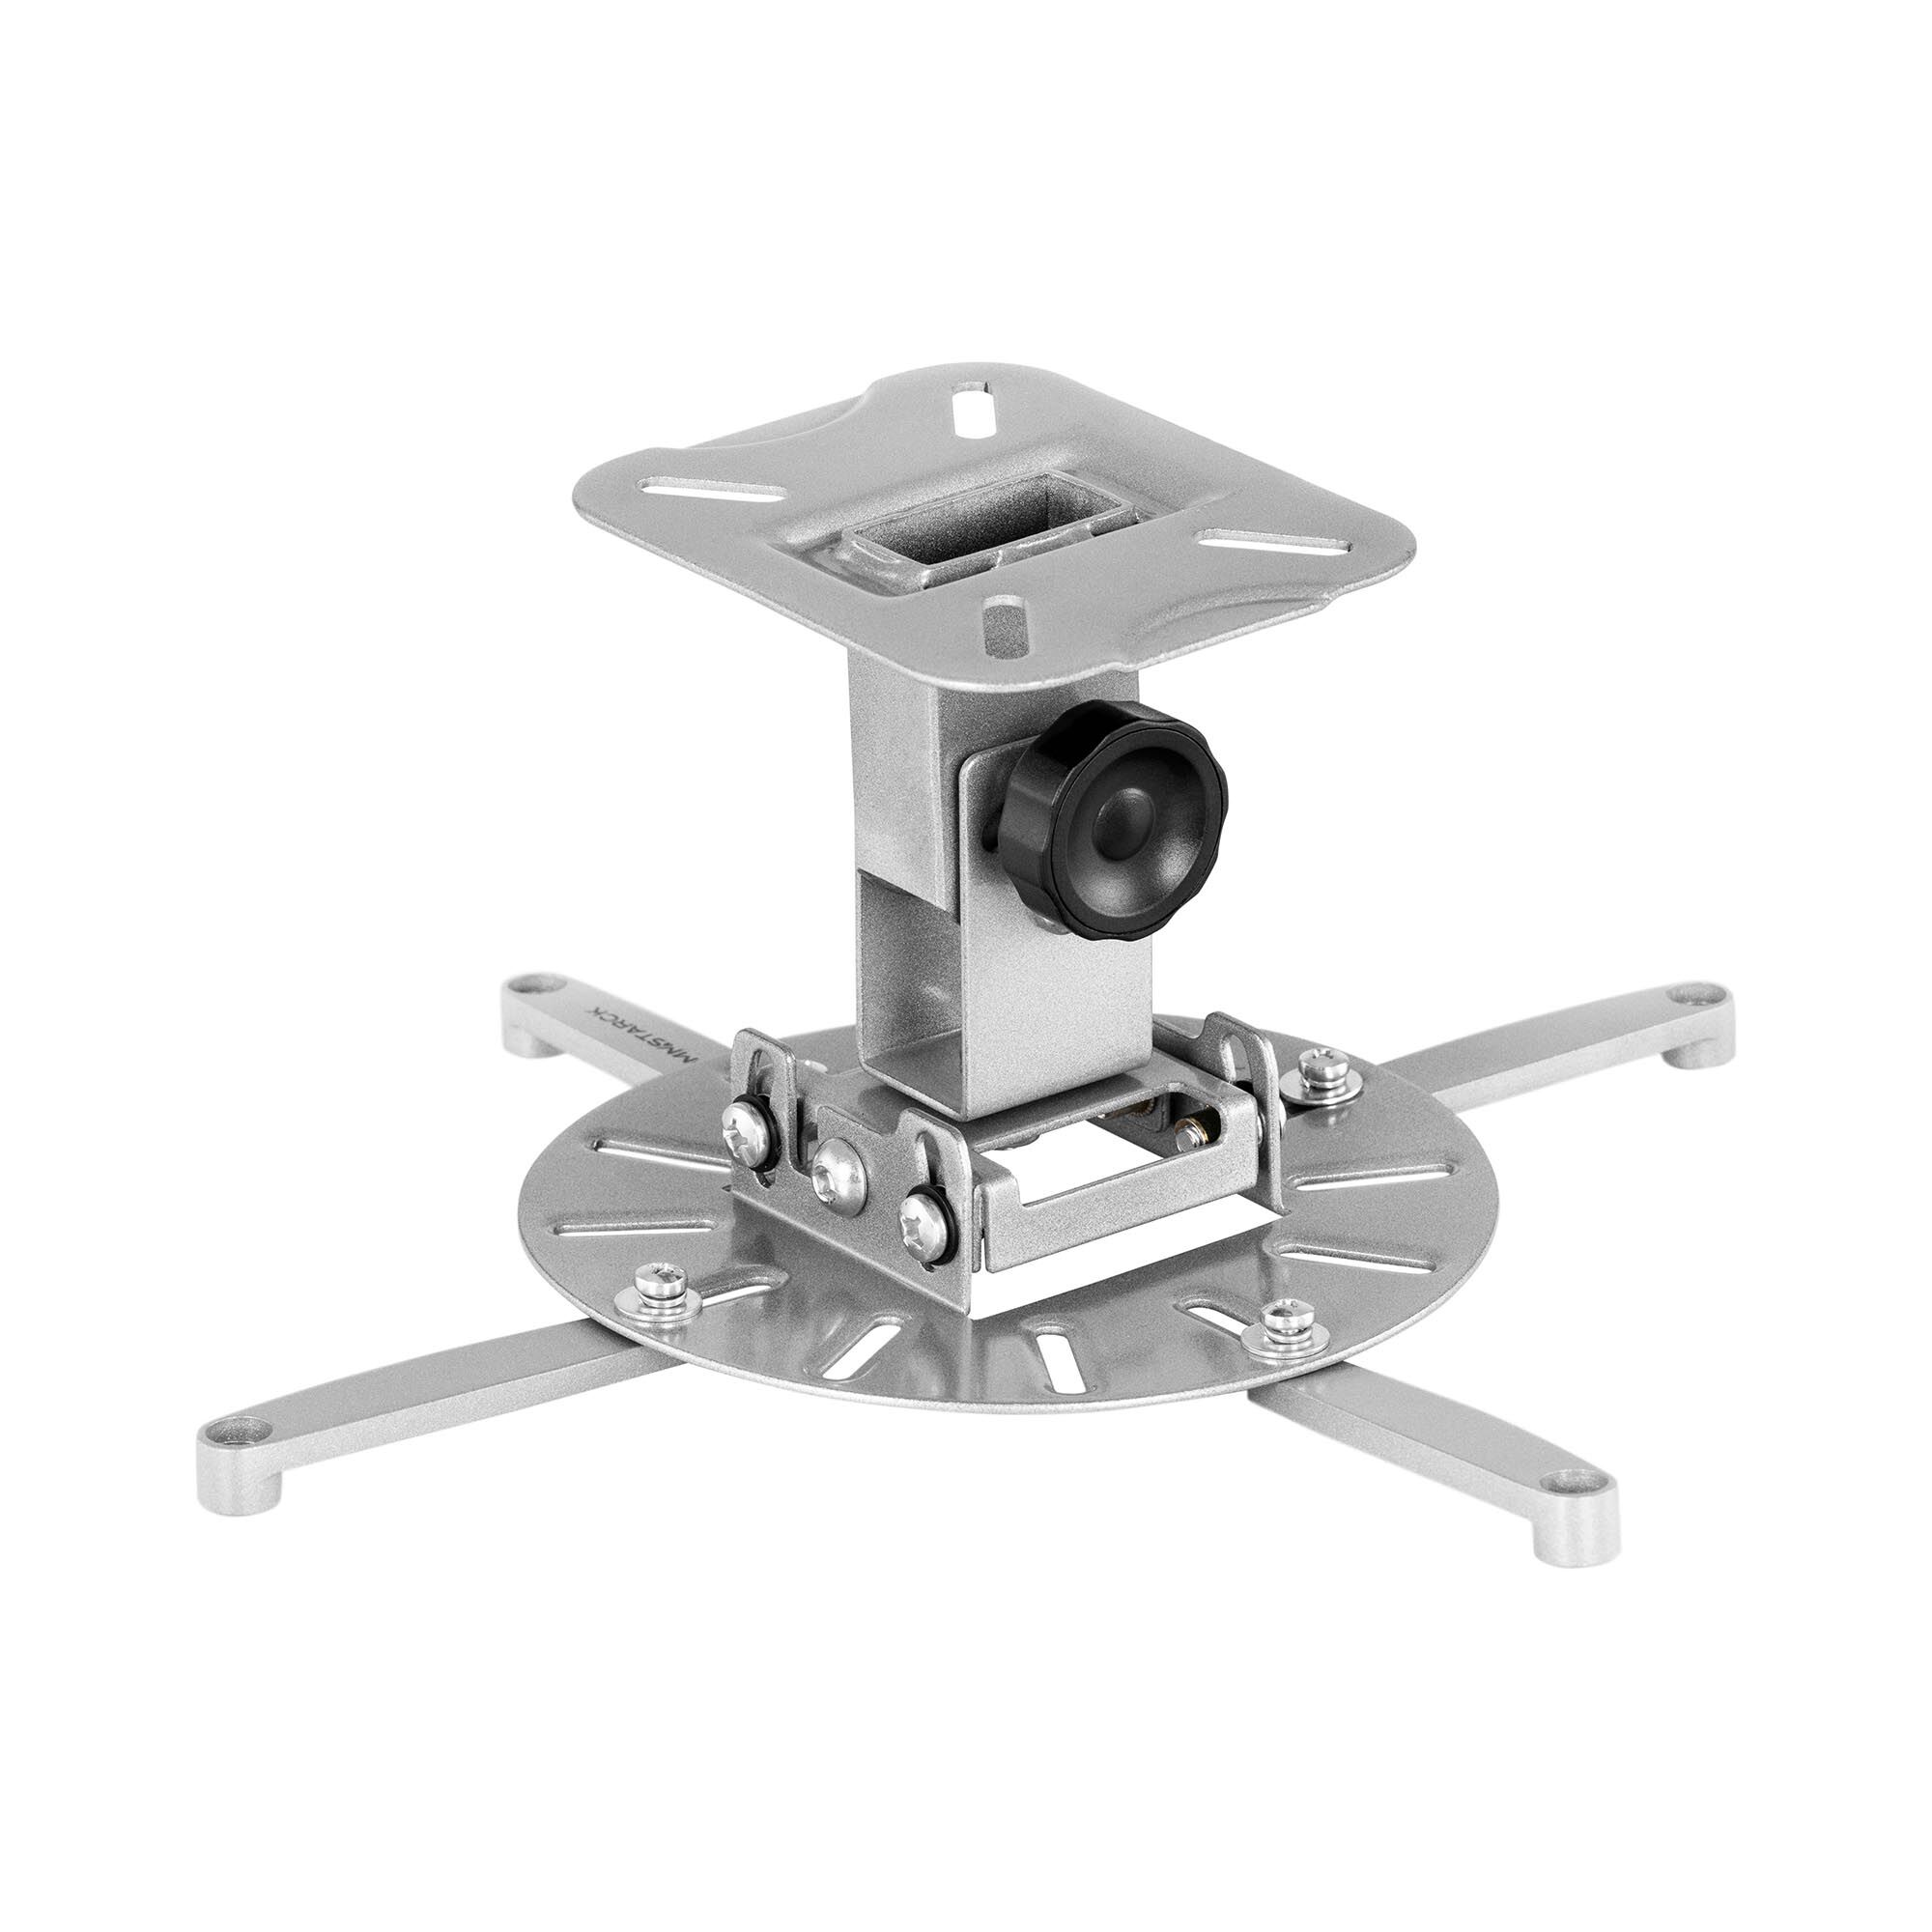 Fromm & Starck Projector Ceiling Mount - +/- 35 ° swiveling - +/- 22 ° inclinable - 15 kg